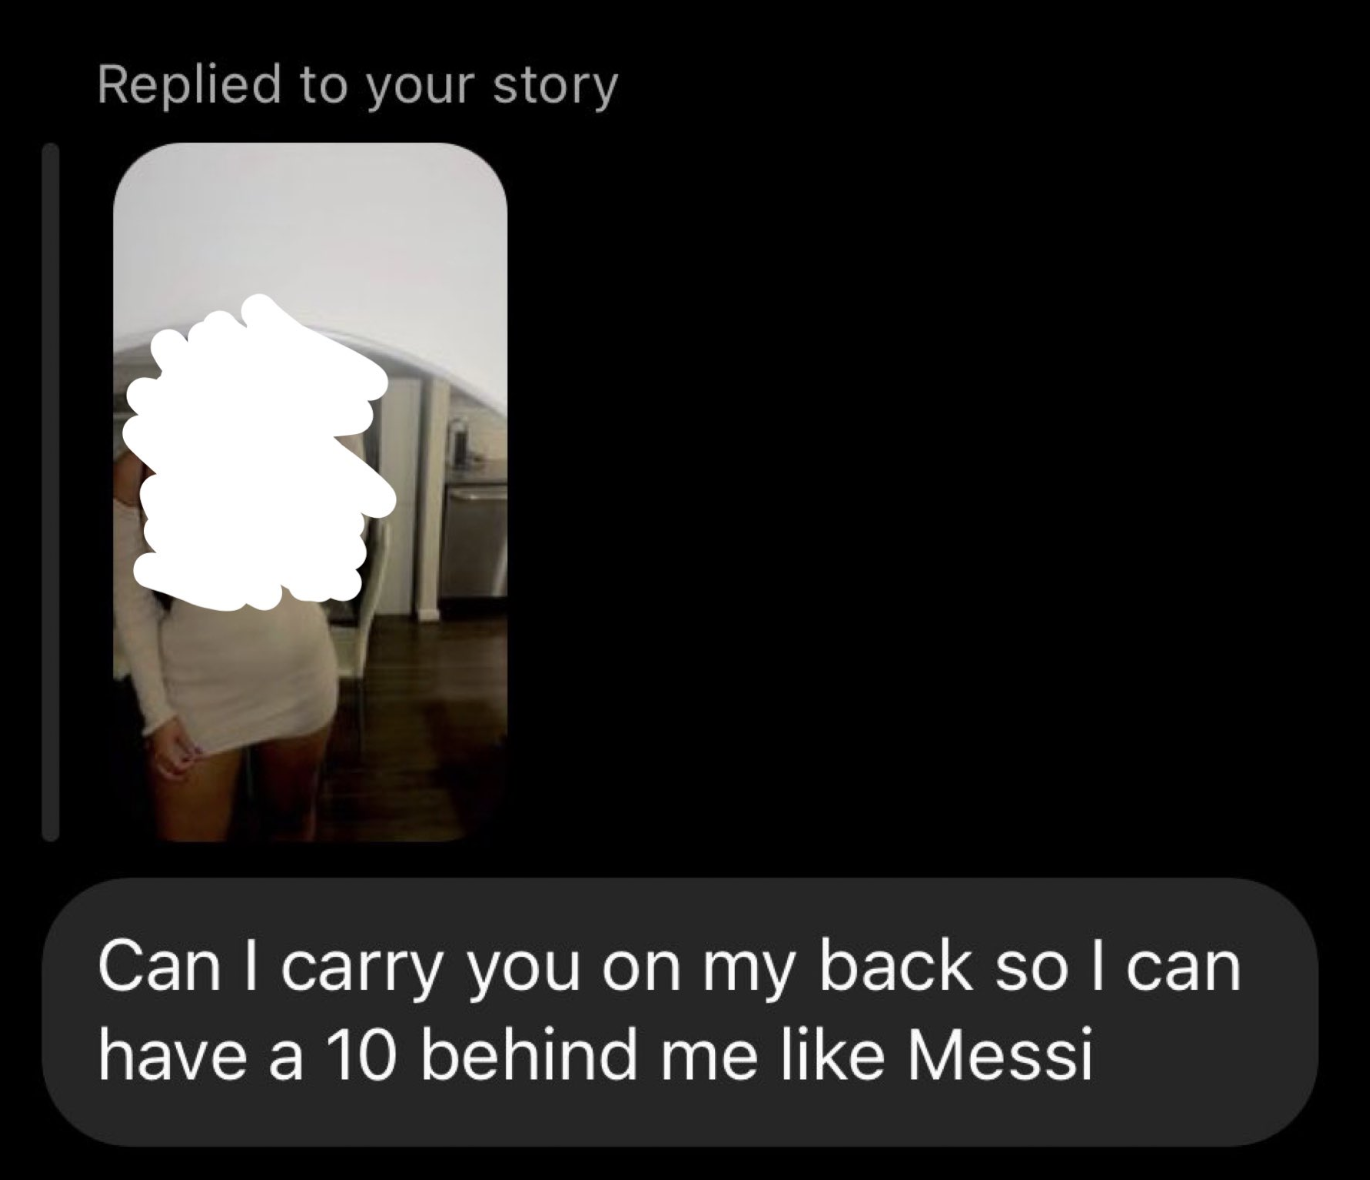 black day - Replied to your story Can I carry you on my back so I can have a 10 behind me Messi